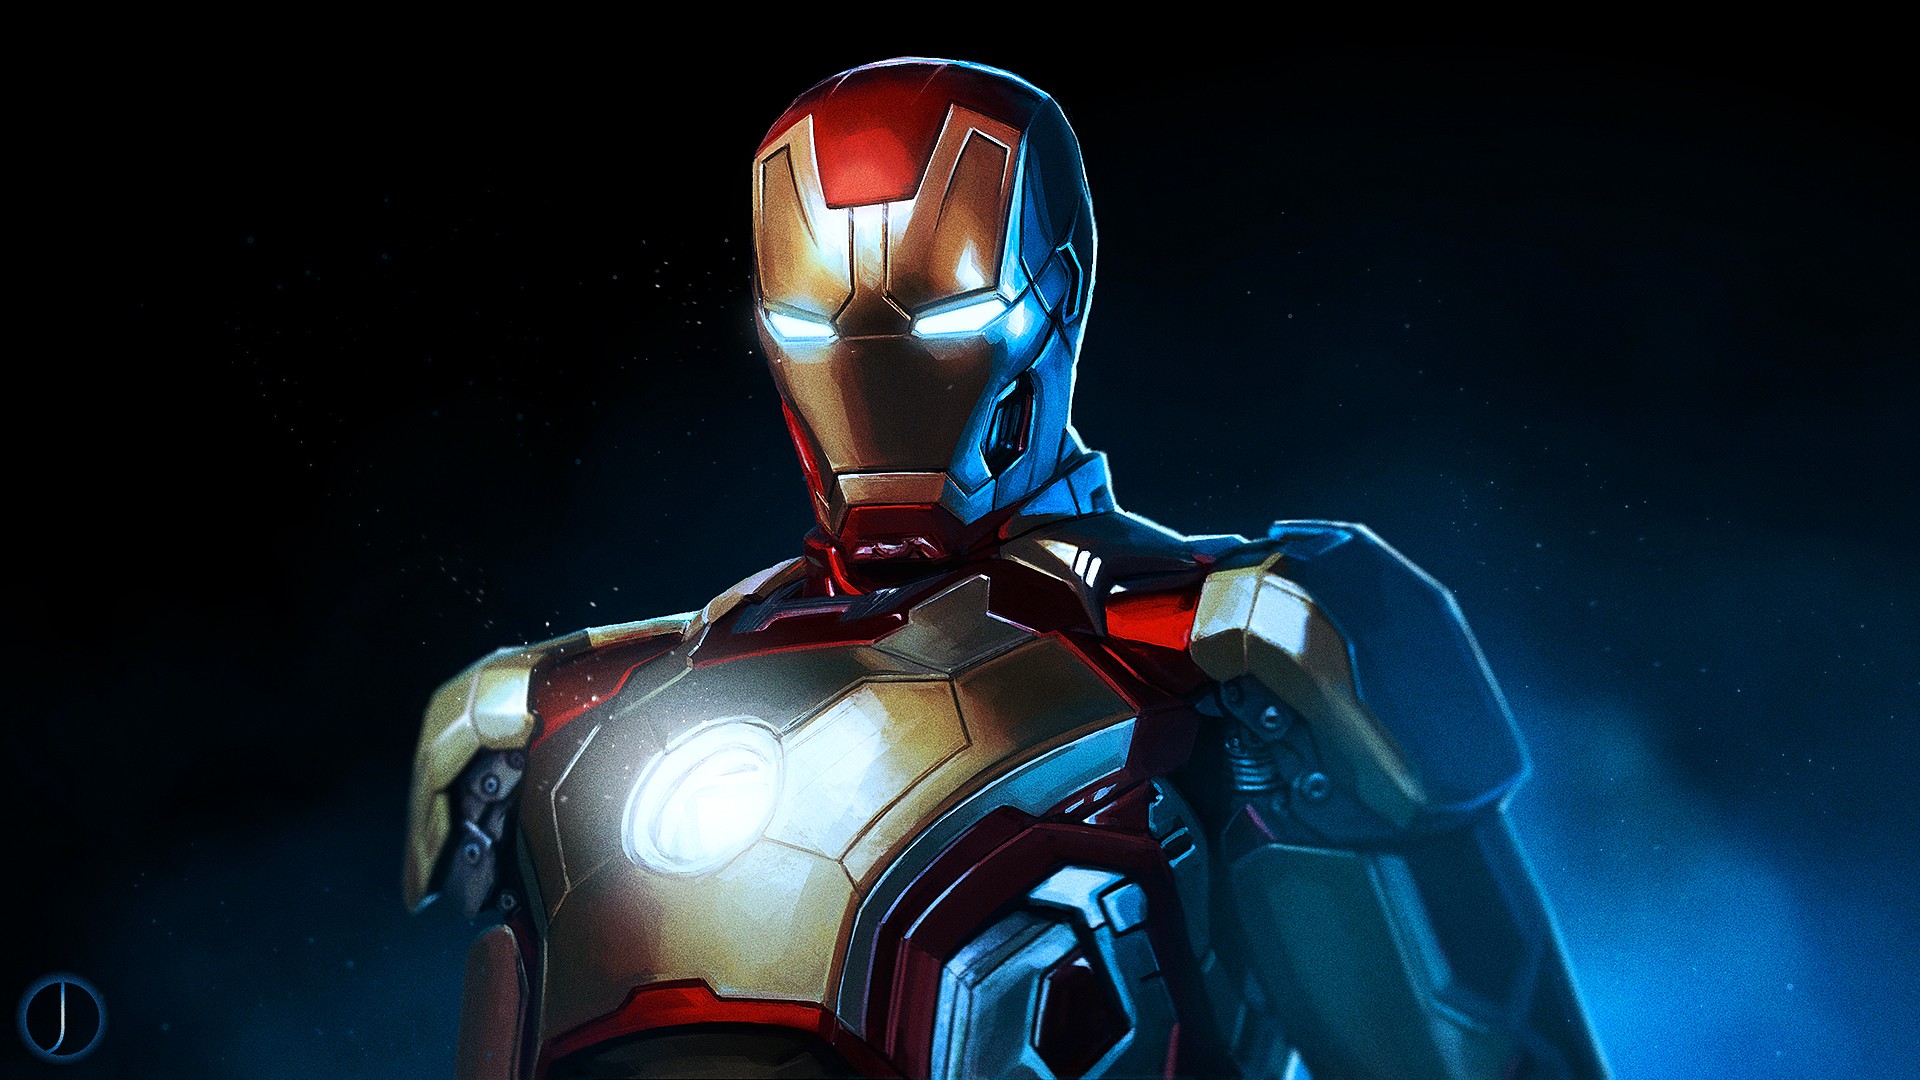 Mobile wallpaper: Movie, Iron Man, 303735 download the picture for free.